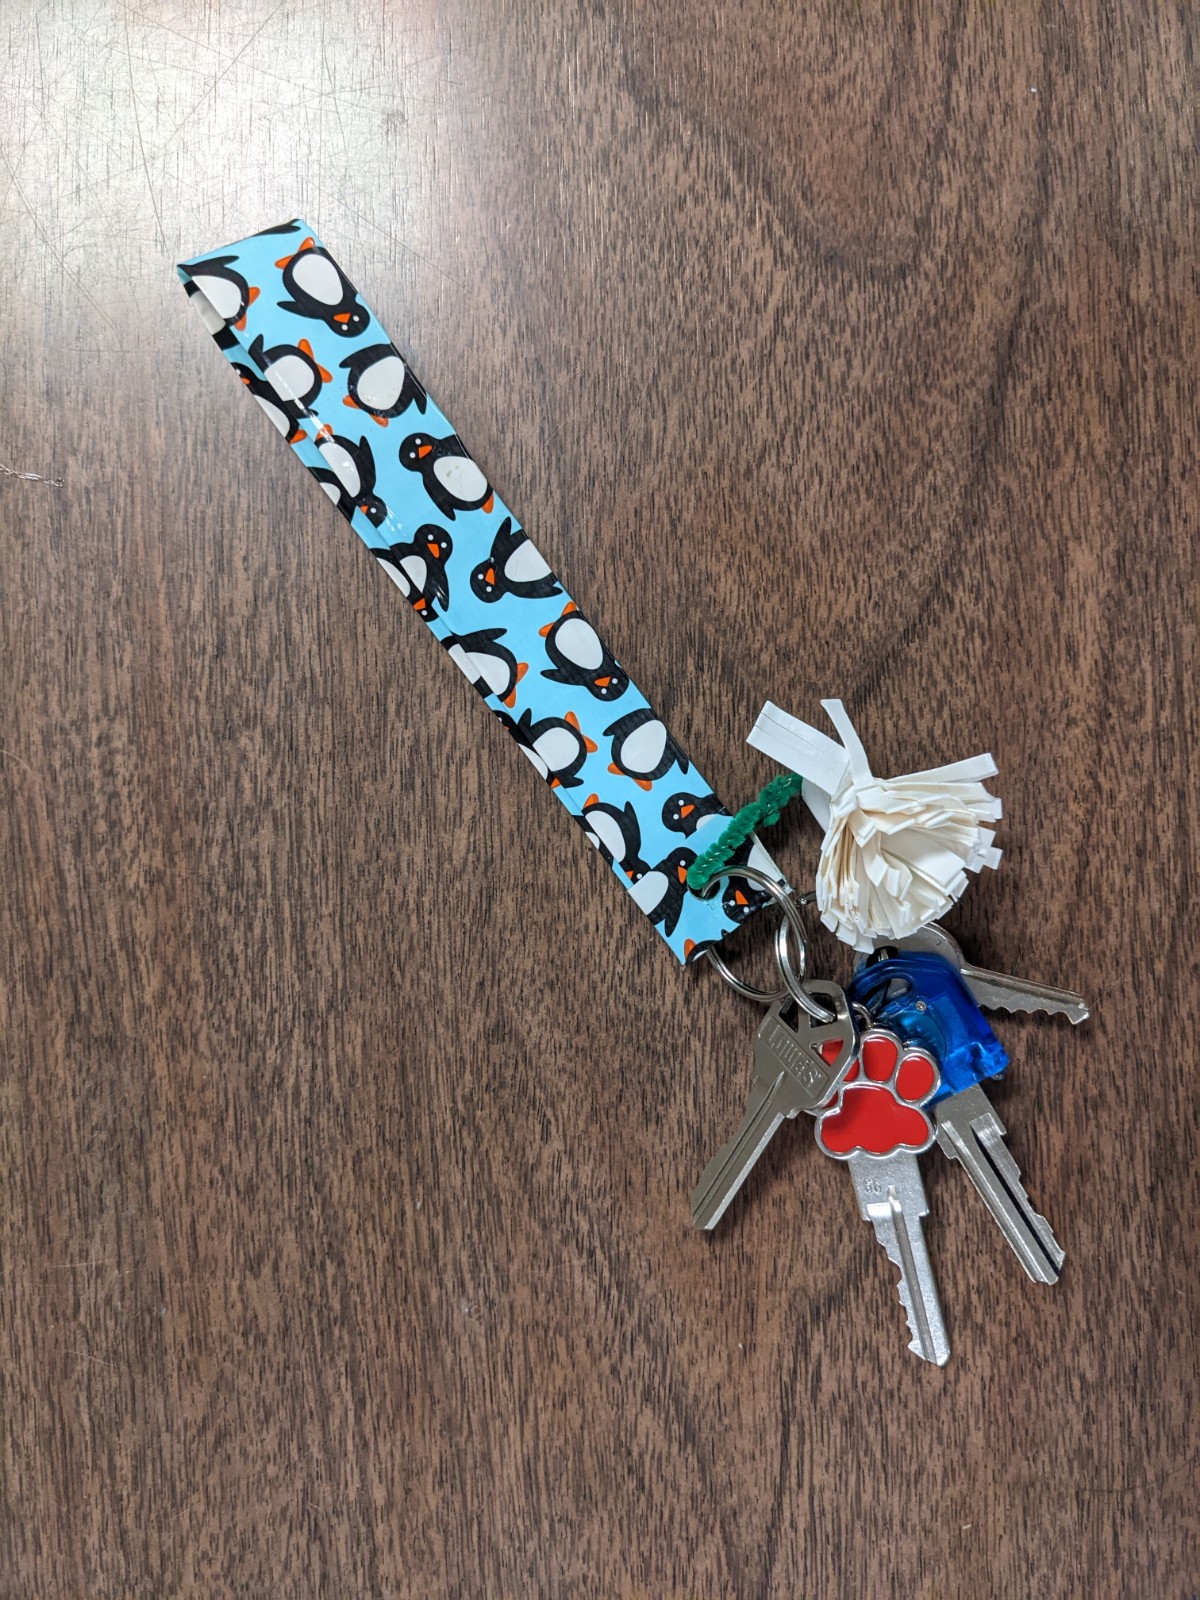 penguin on light blue duct tape keychain with keys and white duct tape pom pom